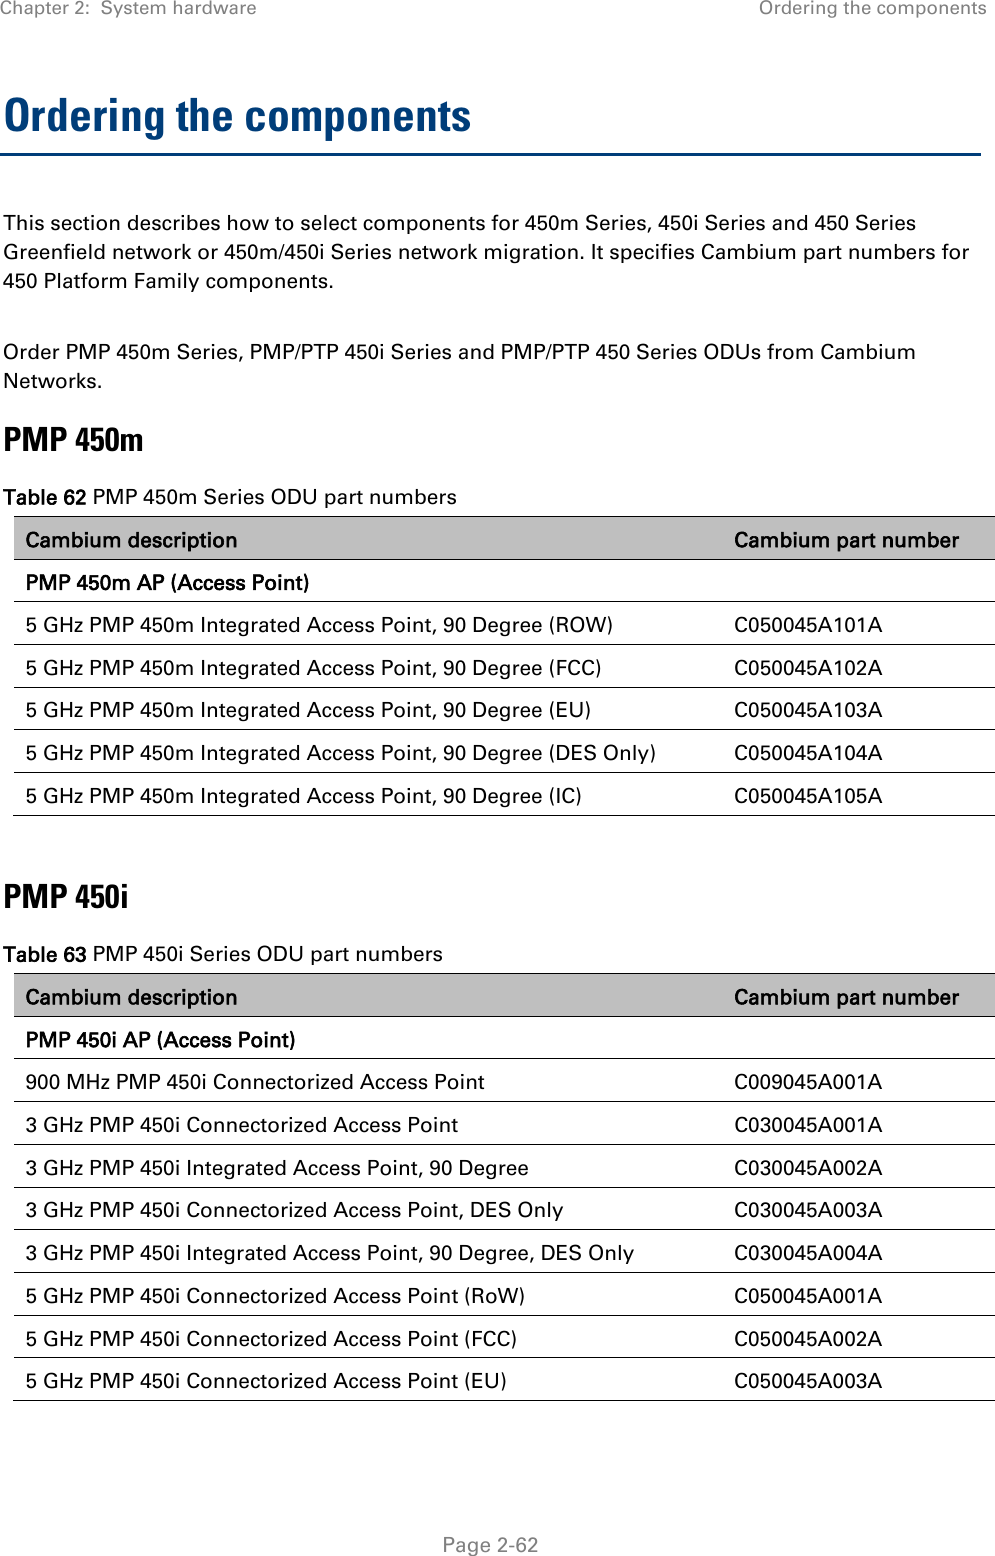 Chapter 2:  System hardware Ordering the components   Page 2-62 Ordering the components This section describes how to select components for 450m Series, 450i Series and 450 Series Greenfield network or 450m/450i Series network migration. It specifies Cambium part numbers for 450 Platform Family components.  Order PMP 450m Series, PMP/PTP 450i Series and PMP/PTP 450 Series ODUs from Cambium Networks.  PMP 450m Table 62 PMP 450m Series ODU part numbers Cambium description Cambium part number PMP 450m AP (Access Point)   5 GHz PMP 450m Integrated Access Point, 90 Degree (ROW) C050045A101A 5 GHz PMP 450m Integrated Access Point, 90 Degree (FCC) C050045A102A 5 GHz PMP 450m Integrated Access Point, 90 Degree (EU) C050045A103A 5 GHz PMP 450m Integrated Access Point, 90 Degree (DES Only) C050045A104A 5 GHz PMP 450m Integrated Access Point, 90 Degree (IC) C050045A105A  PMP 450i Table 63 PMP 450i Series ODU part numbers Cambium description Cambium part number PMP 450i AP (Access Point)   900 MHz PMP 450i Connectorized Access Point C009045A001A 3 GHz PMP 450i Connectorized Access Point C030045A001A 3 GHz PMP 450i Integrated Access Point, 90 Degree C030045A002A 3 GHz PMP 450i Connectorized Access Point, DES Only C030045A003A 3 GHz PMP 450i Integrated Access Point, 90 Degree, DES Only C030045A004A 5 GHz PMP 450i Connectorized Access Point (RoW) C050045A001A 5 GHz PMP 450i Connectorized Access Point (FCC) C050045A002A 5 GHz PMP 450i Connectorized Access Point (EU) C050045A003A 